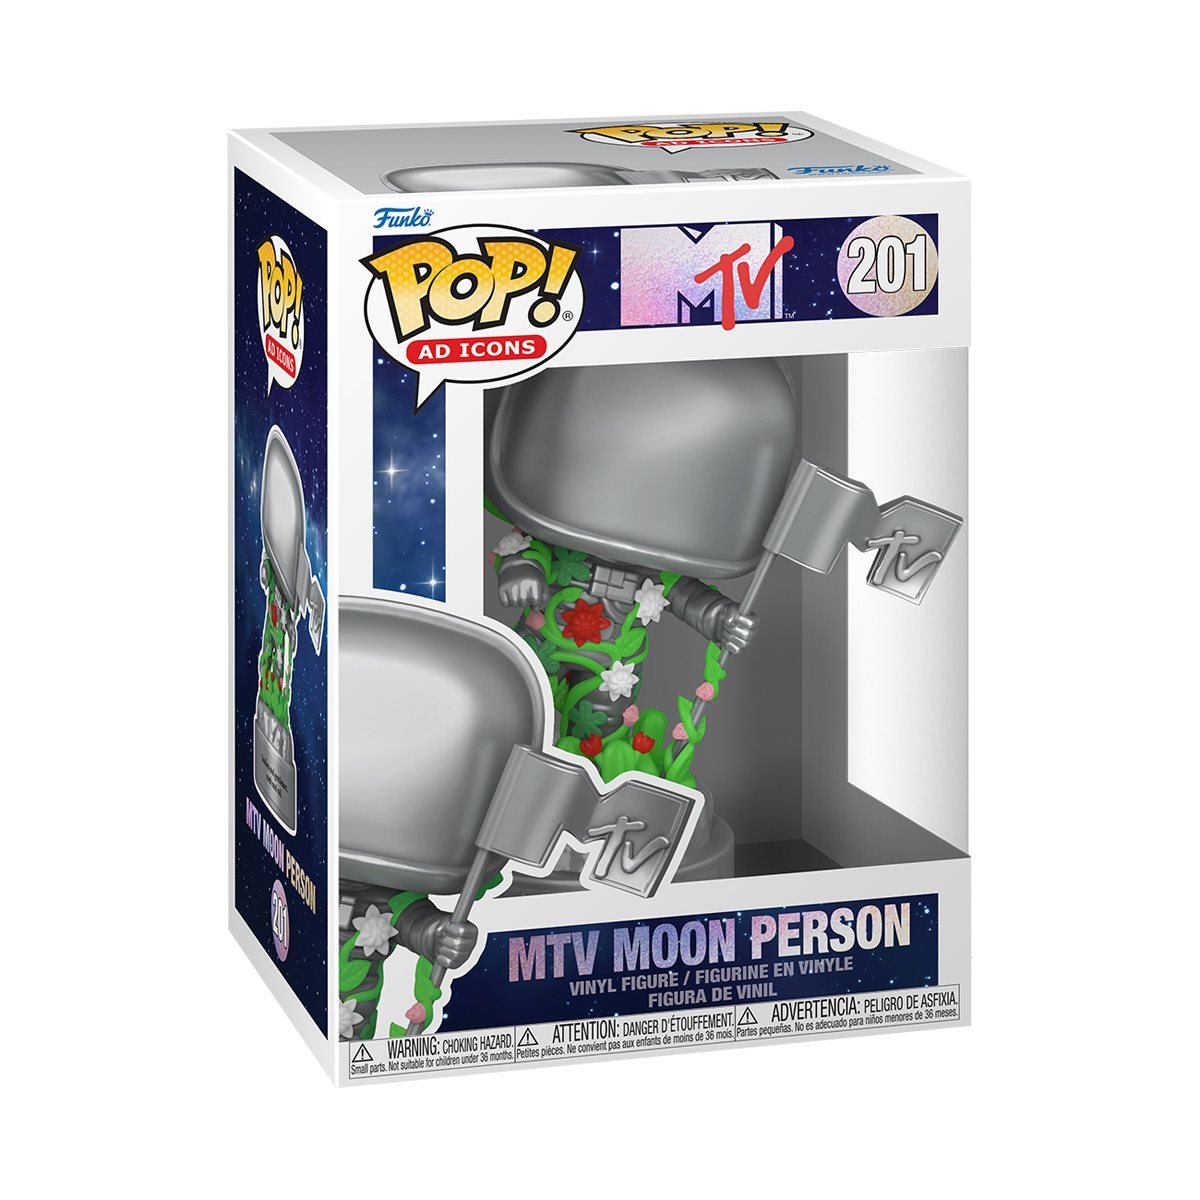 POP! Icons MTV Moon Person #201